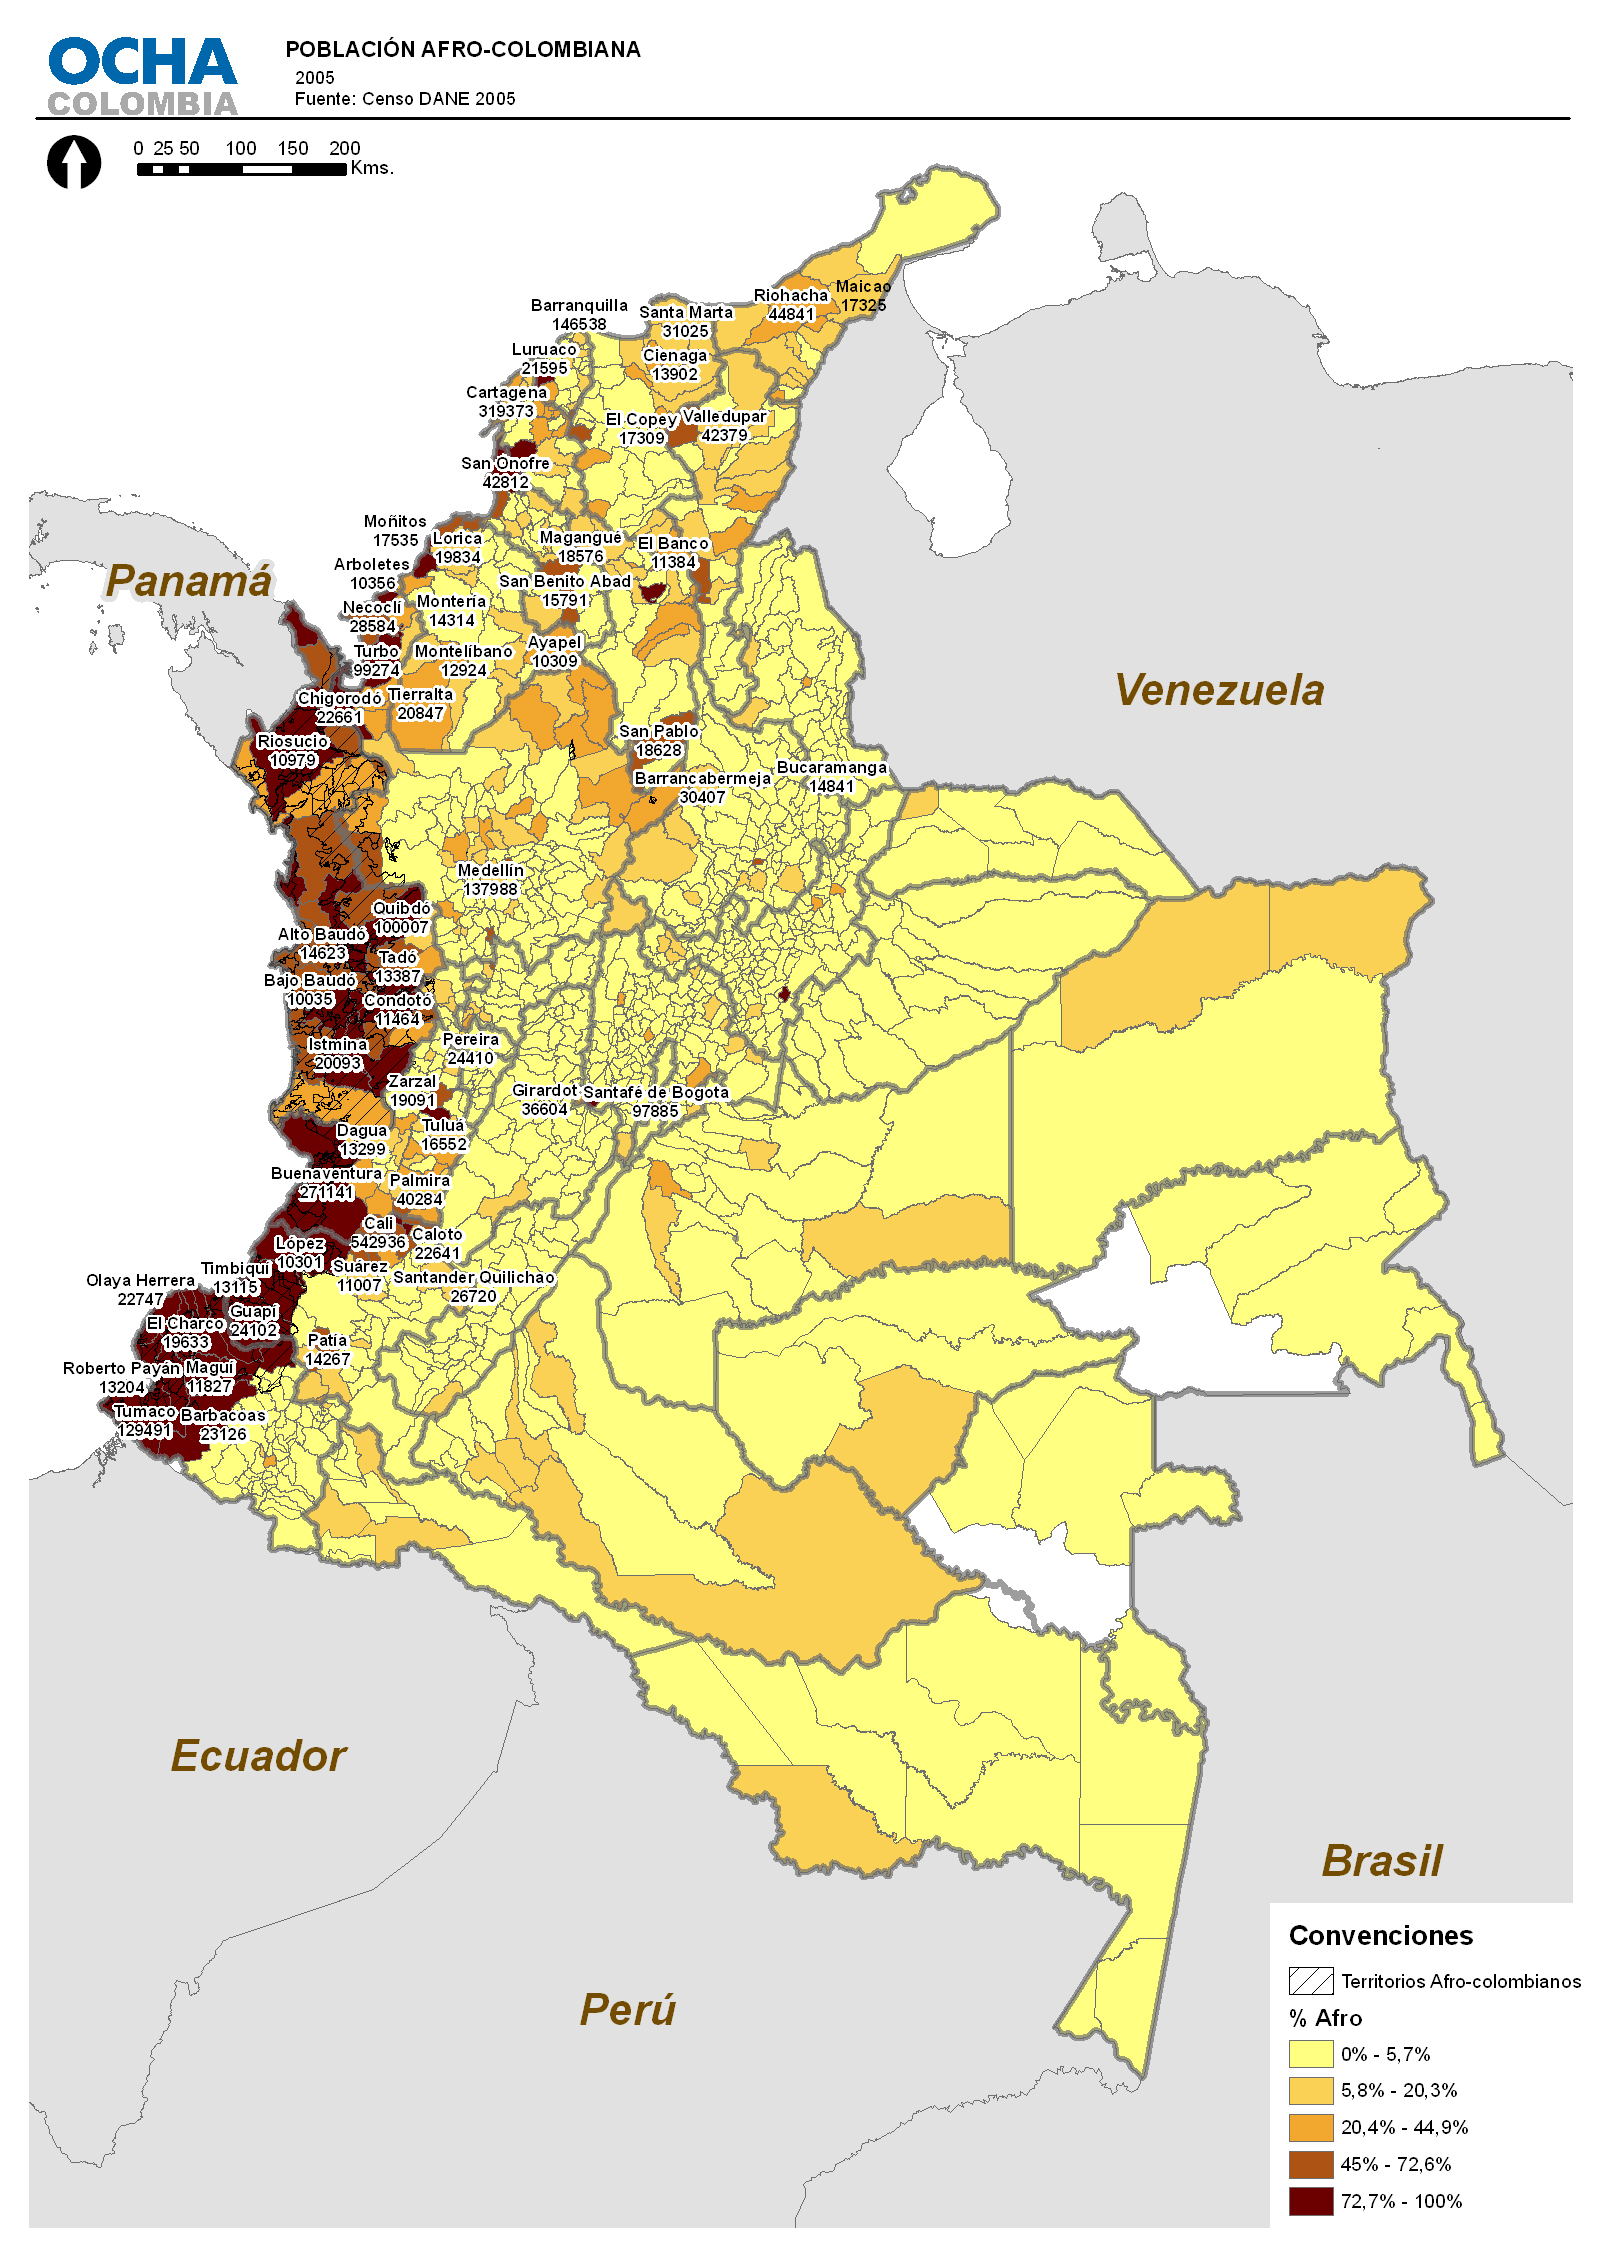 Afro-Colombian population - Full size | Gifex